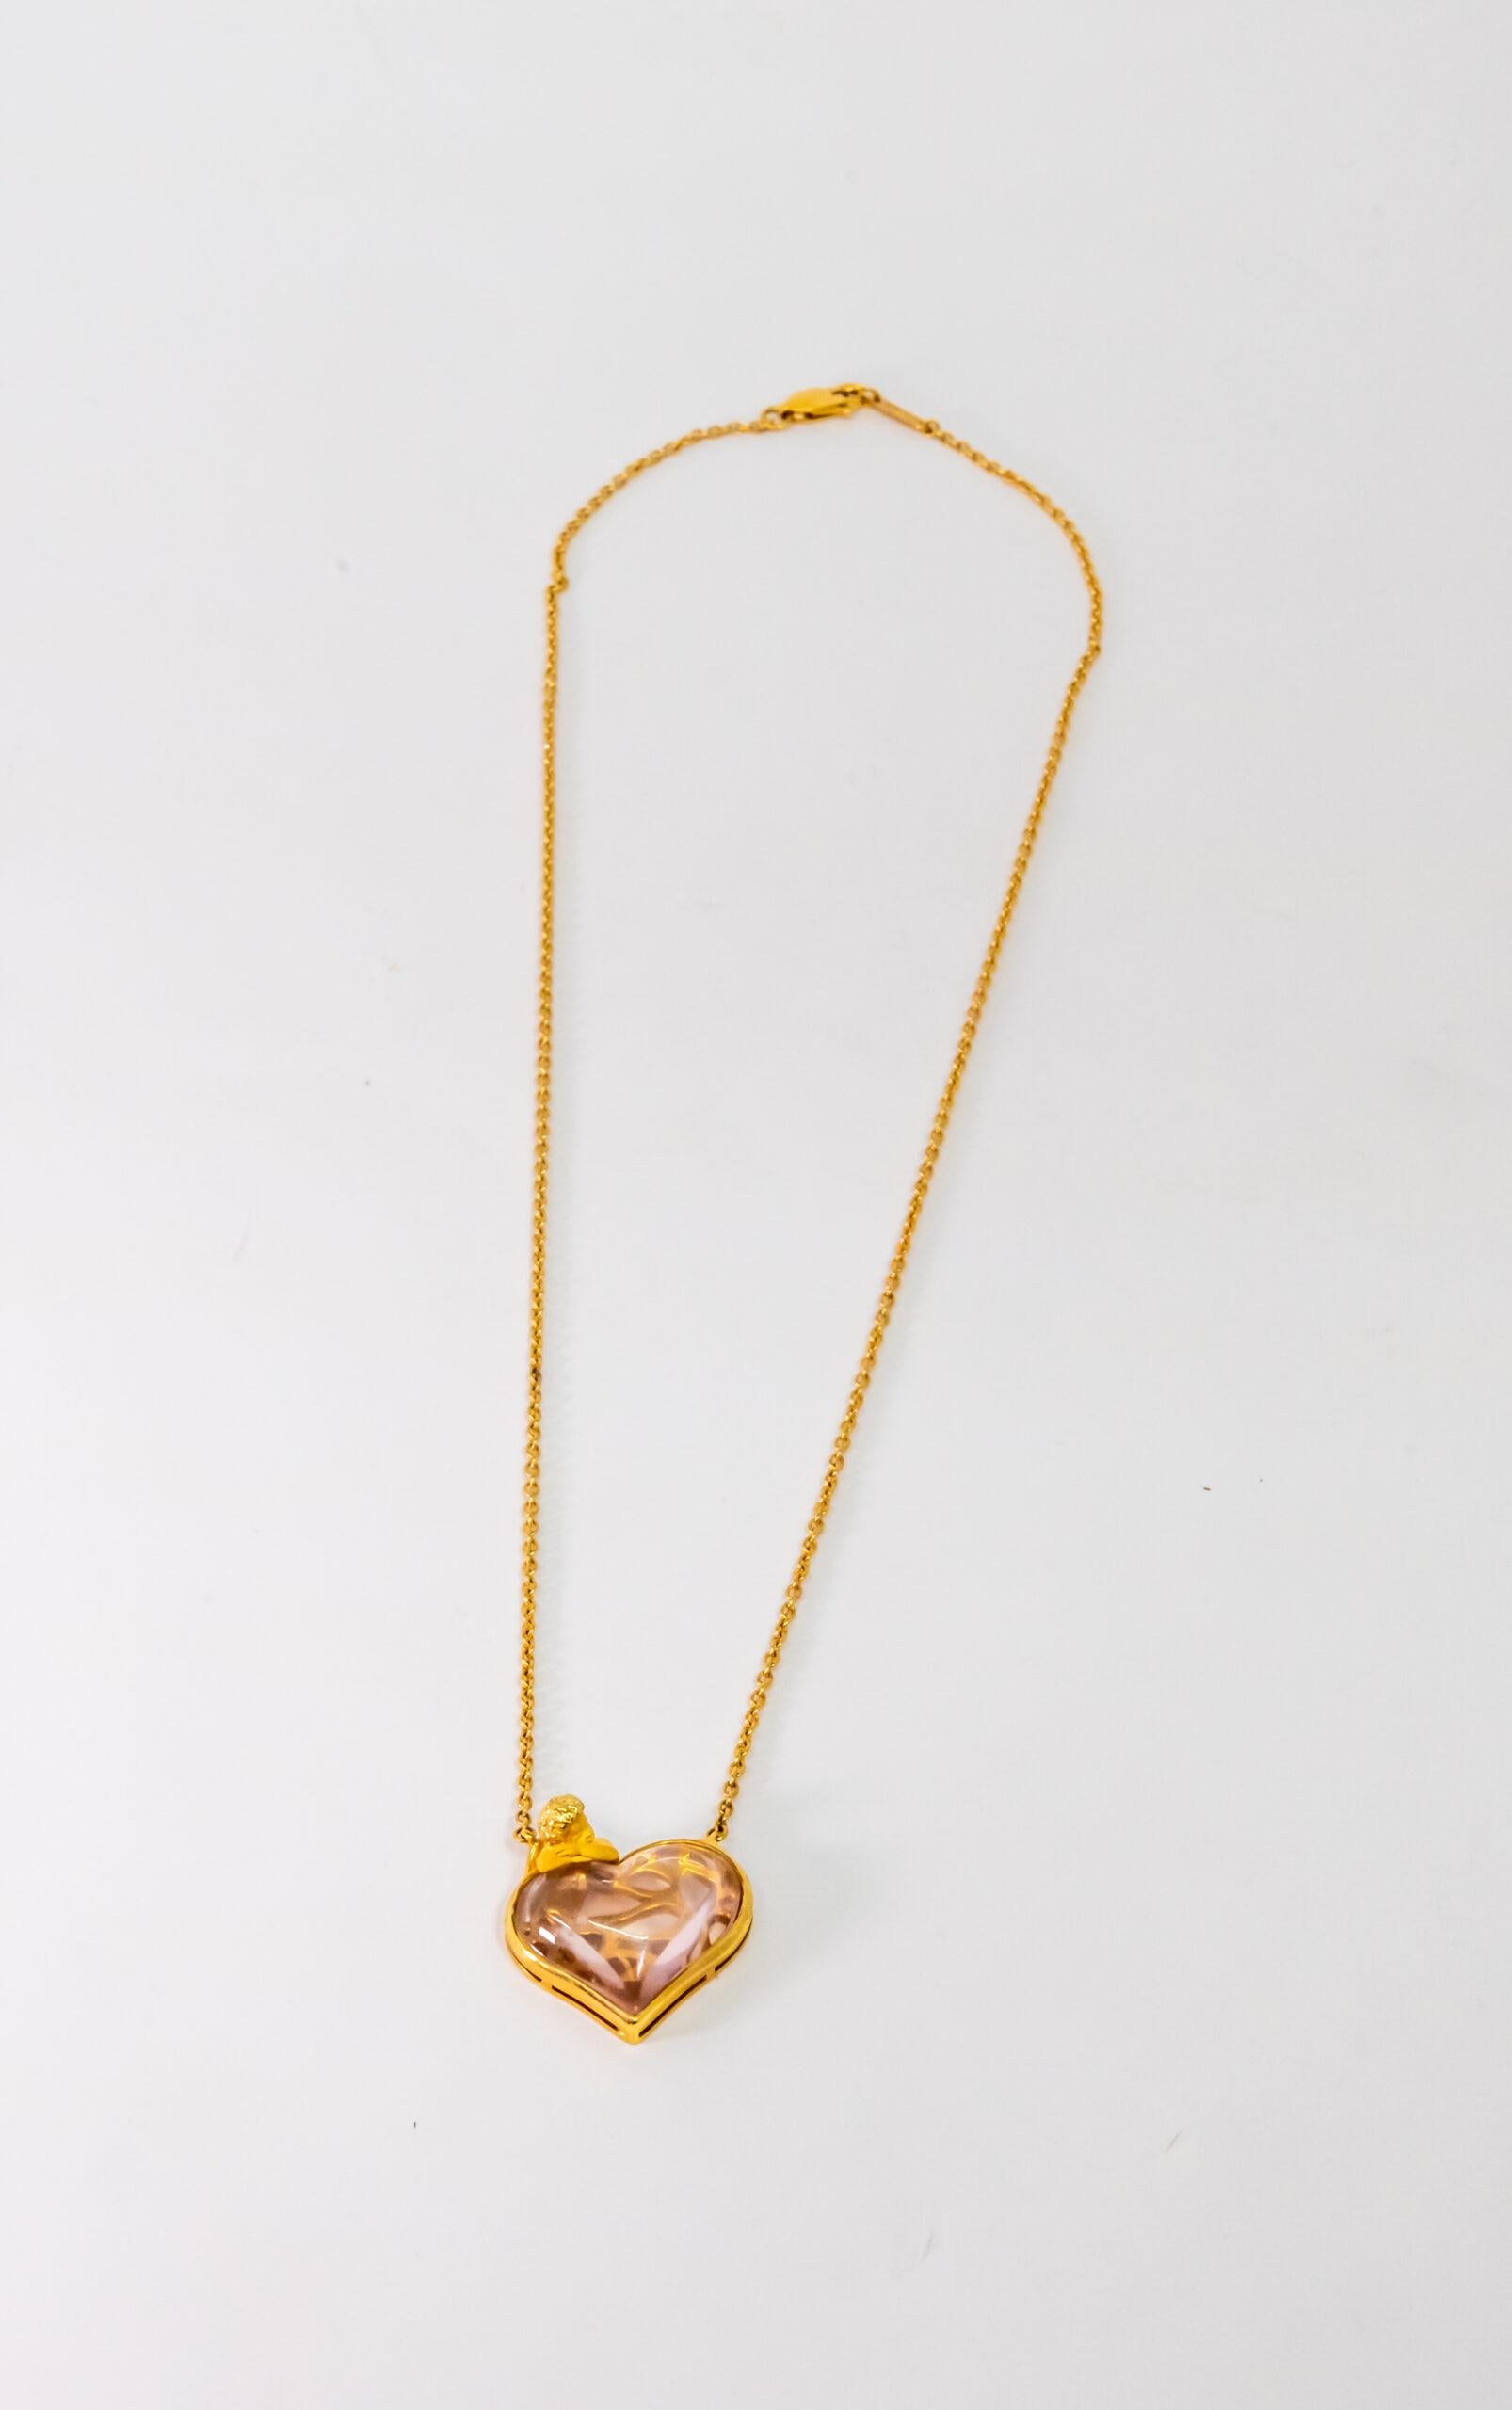 18K Yellow Gold pendant. 18K Yellow Gold Rolo chain with lobster claw lock. This piece is decorated with yellow gold angel figure and heart-shaped crystal rock pendant .

Length: 23 cm